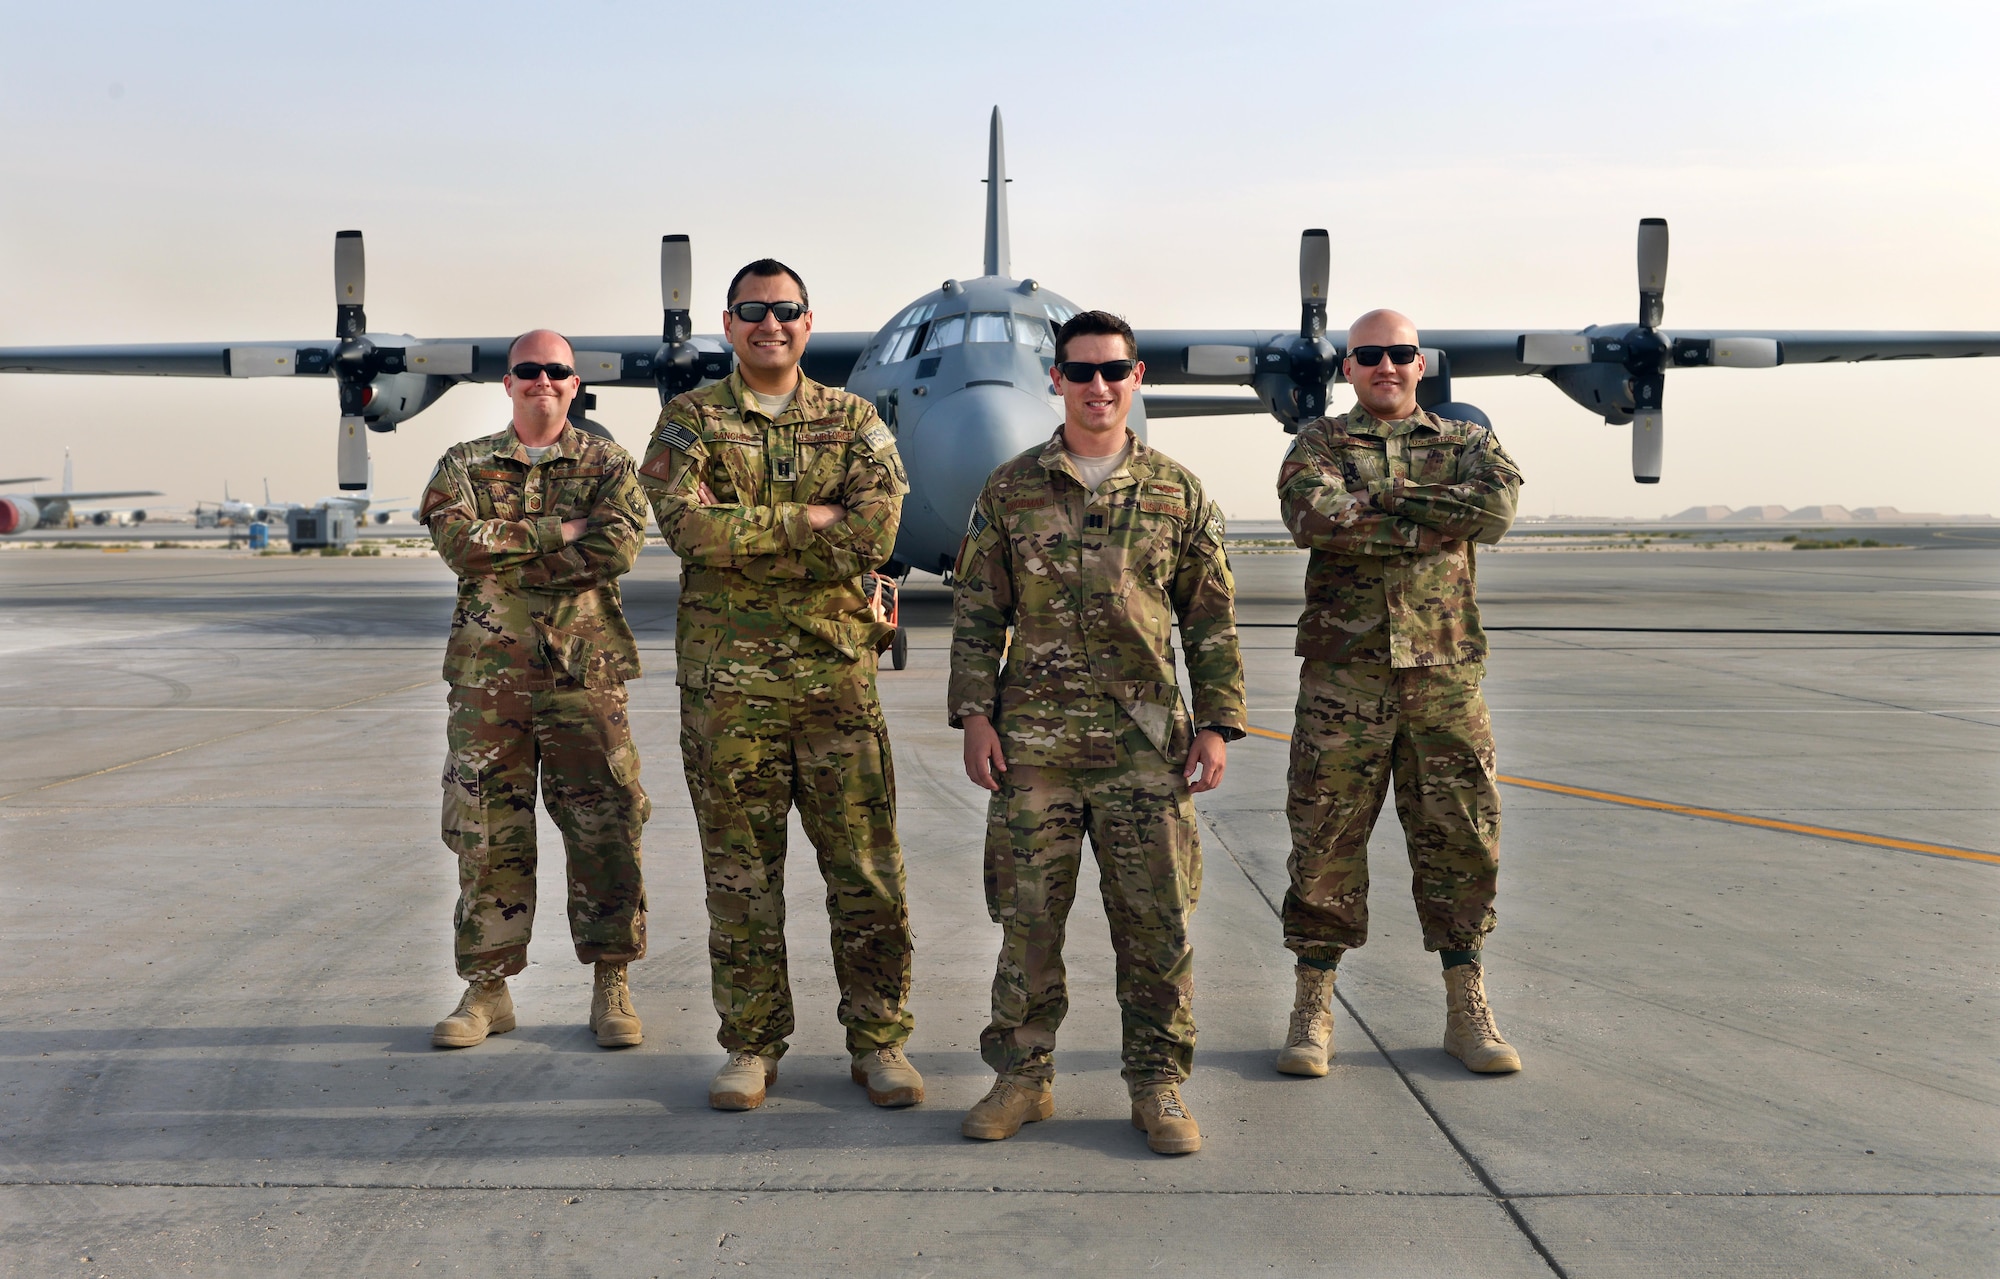 Airmen with the 379th Air Expeditionary Wing Safety Office flight safety section pose for a photo at Al Udeid Air Base, Qatar, April 14, 2017. While deployed, flight safety Airmen deal with anything involving aircraft-related safety matters, for instance advising on safe night driving regulations due to lower visibility. (U.S. Air Force photo by Senior Airman Cynthia A. Innocenti)